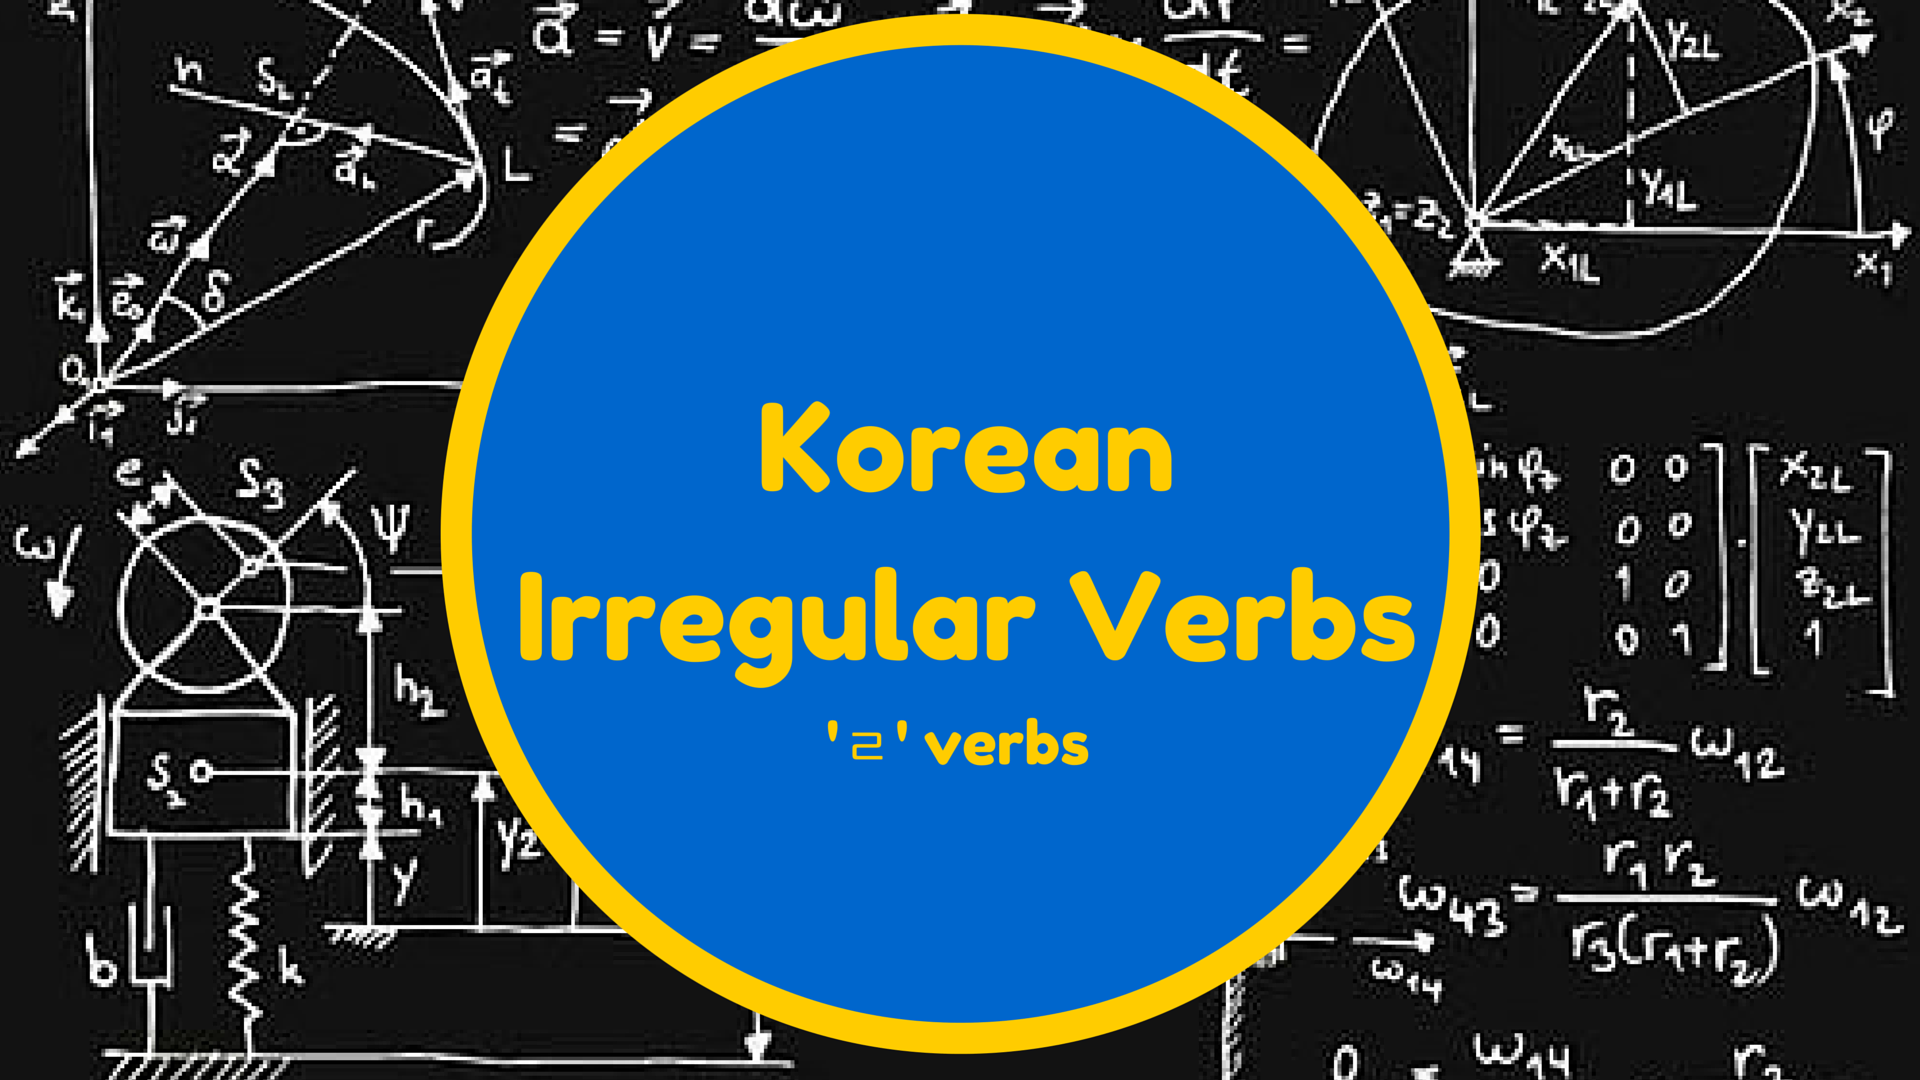 This next set of irregular verbs in this series on Korean irregular verbs are the  ㄹ irregular verbs. This group is known as such because the verb stem ends in ㄹ. Among these verbs are: 만들다 or 살다. Just keep a few simple in mind when using these verbs.